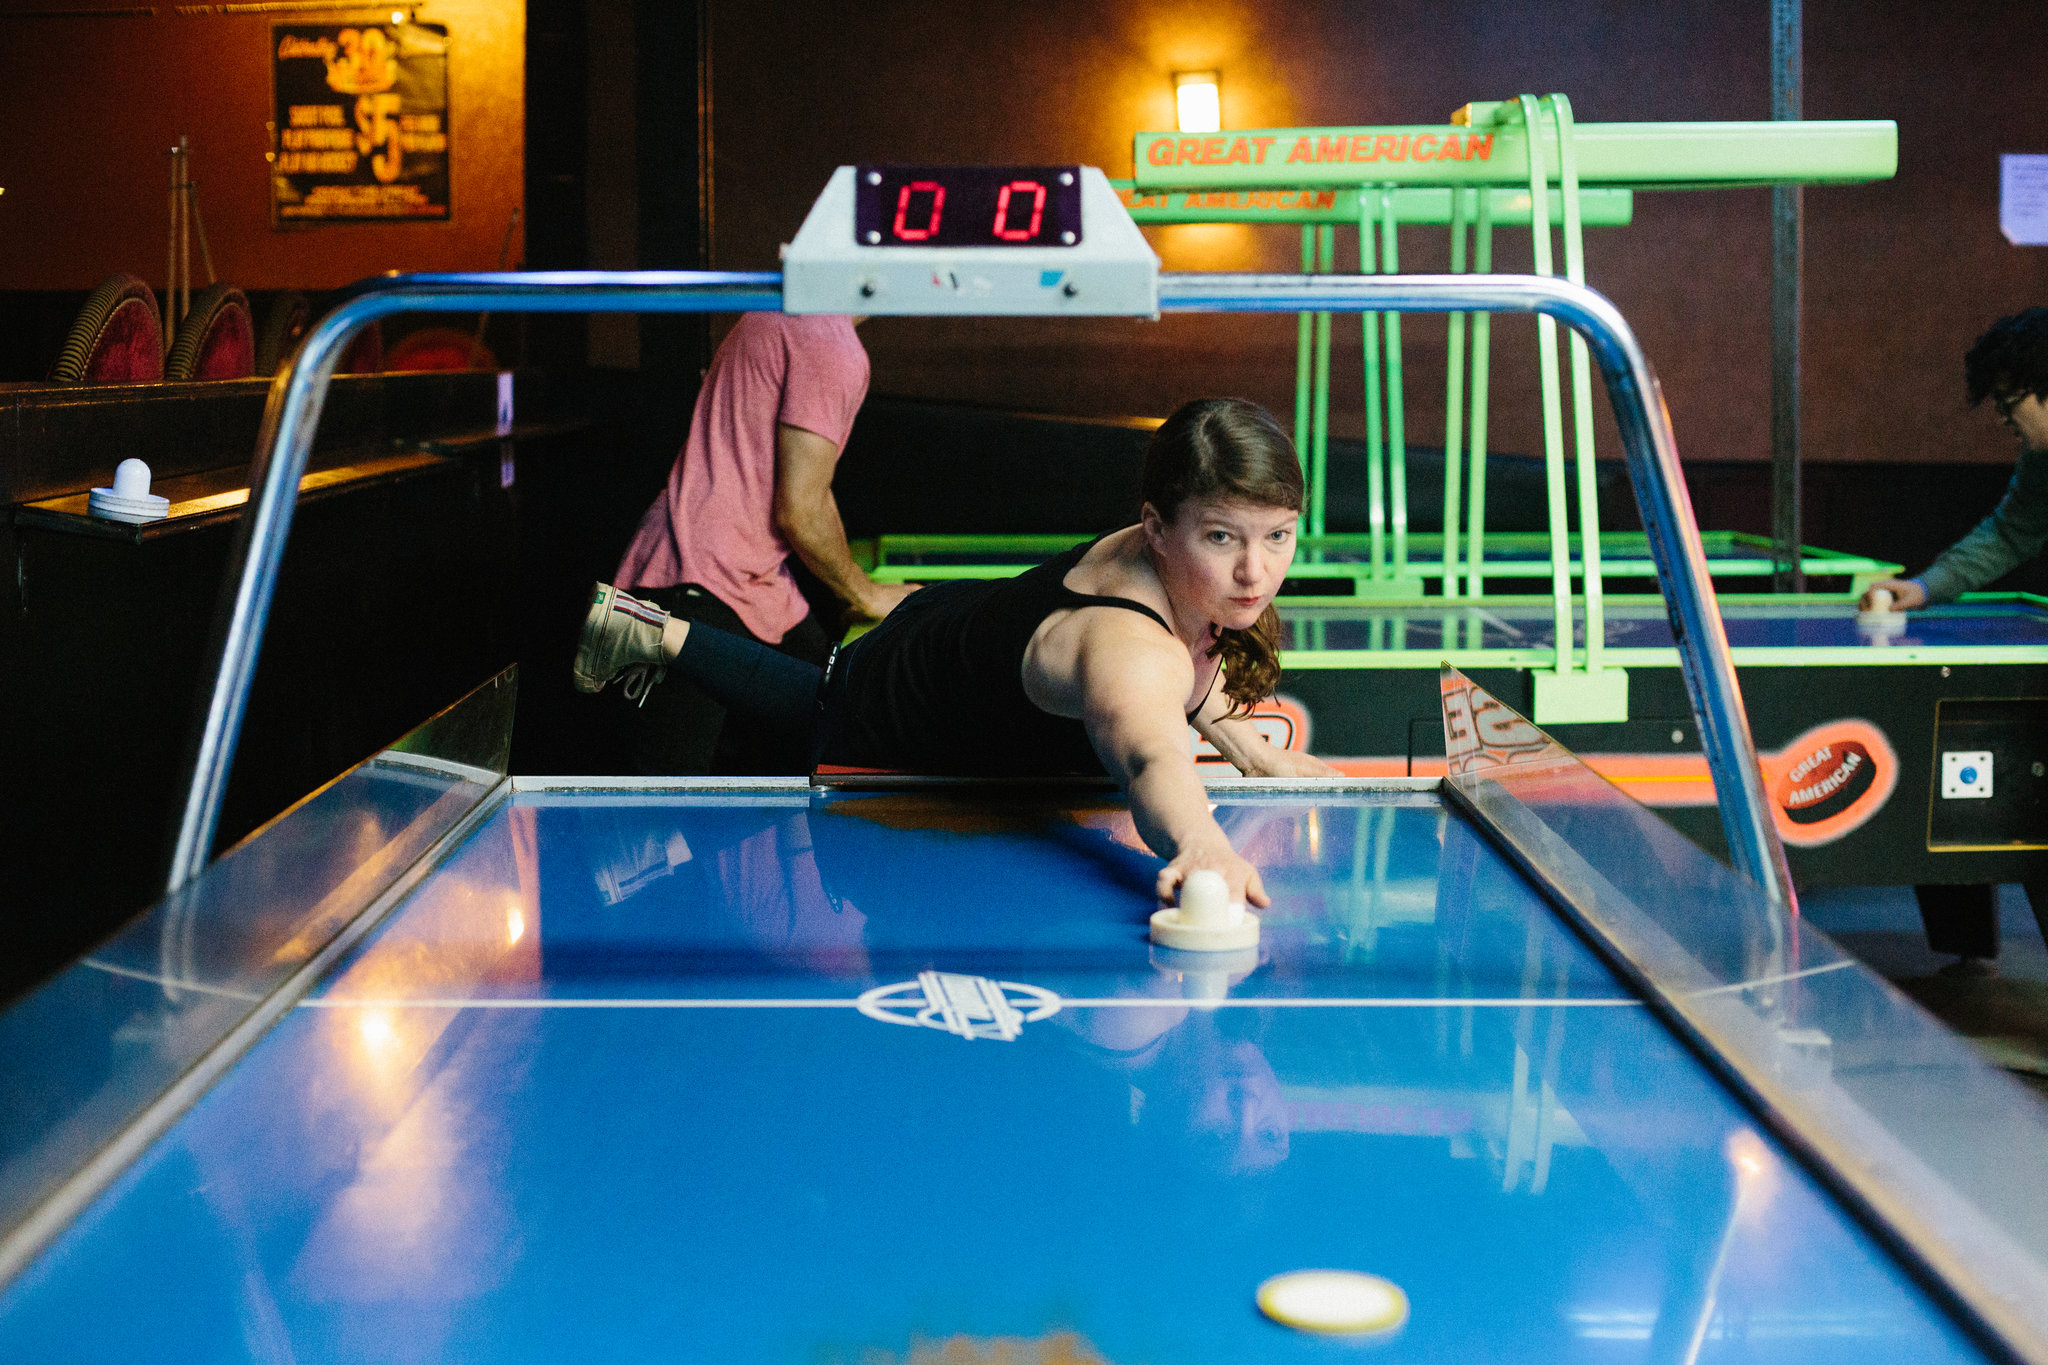 Air Hockey Championship - The Ultimate Battle Of Skill And Speed